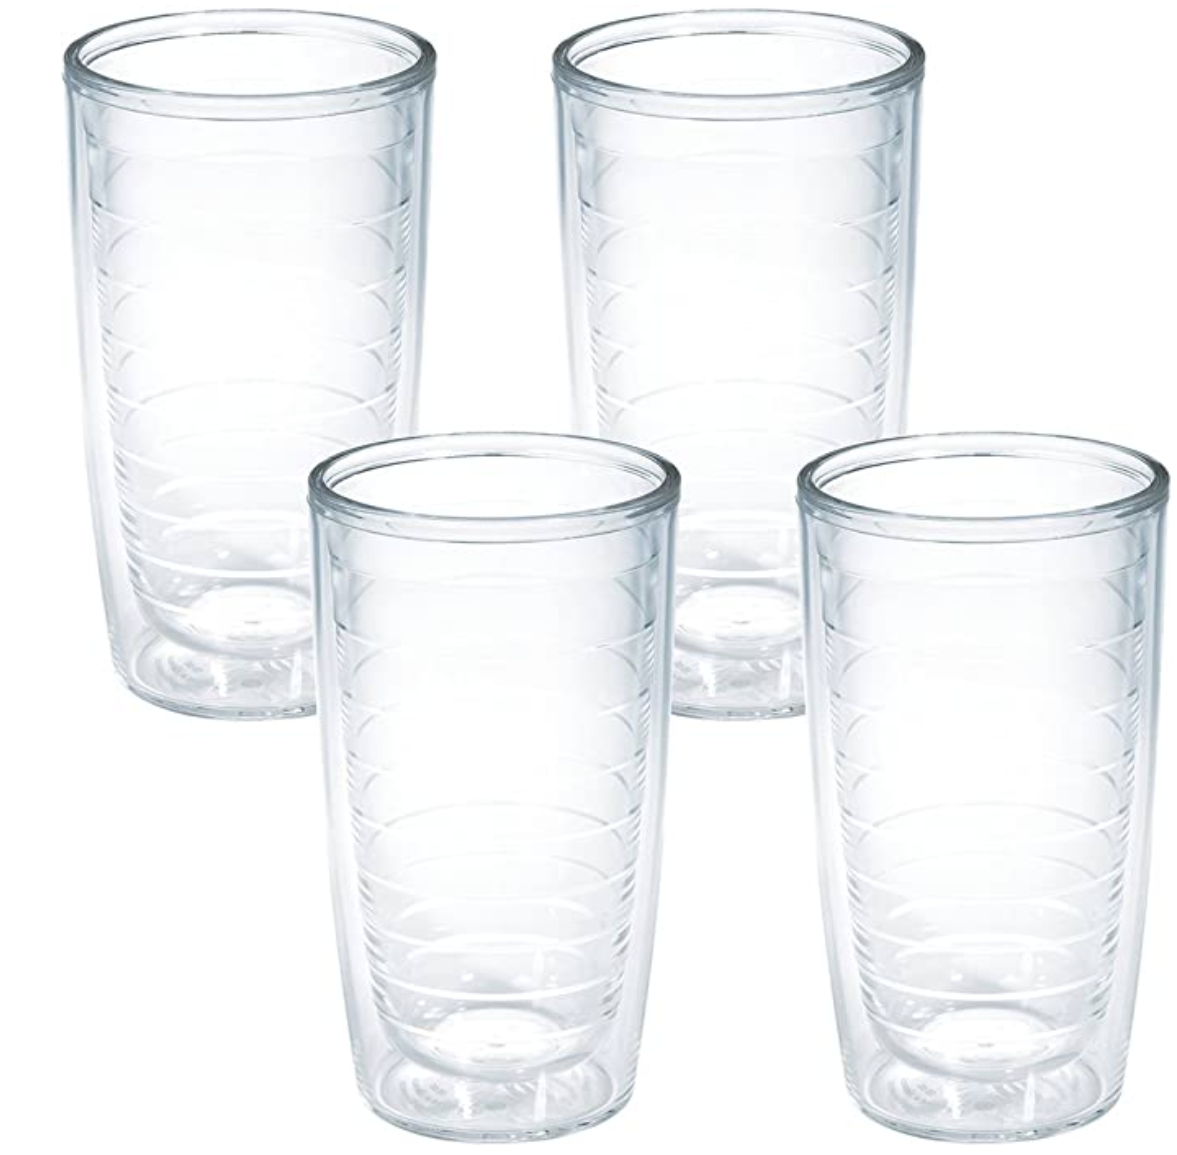 tervis tumblers | Best Amazon Products by popular Houston life and style blog: image of Amazon clear tumbler glasses. 